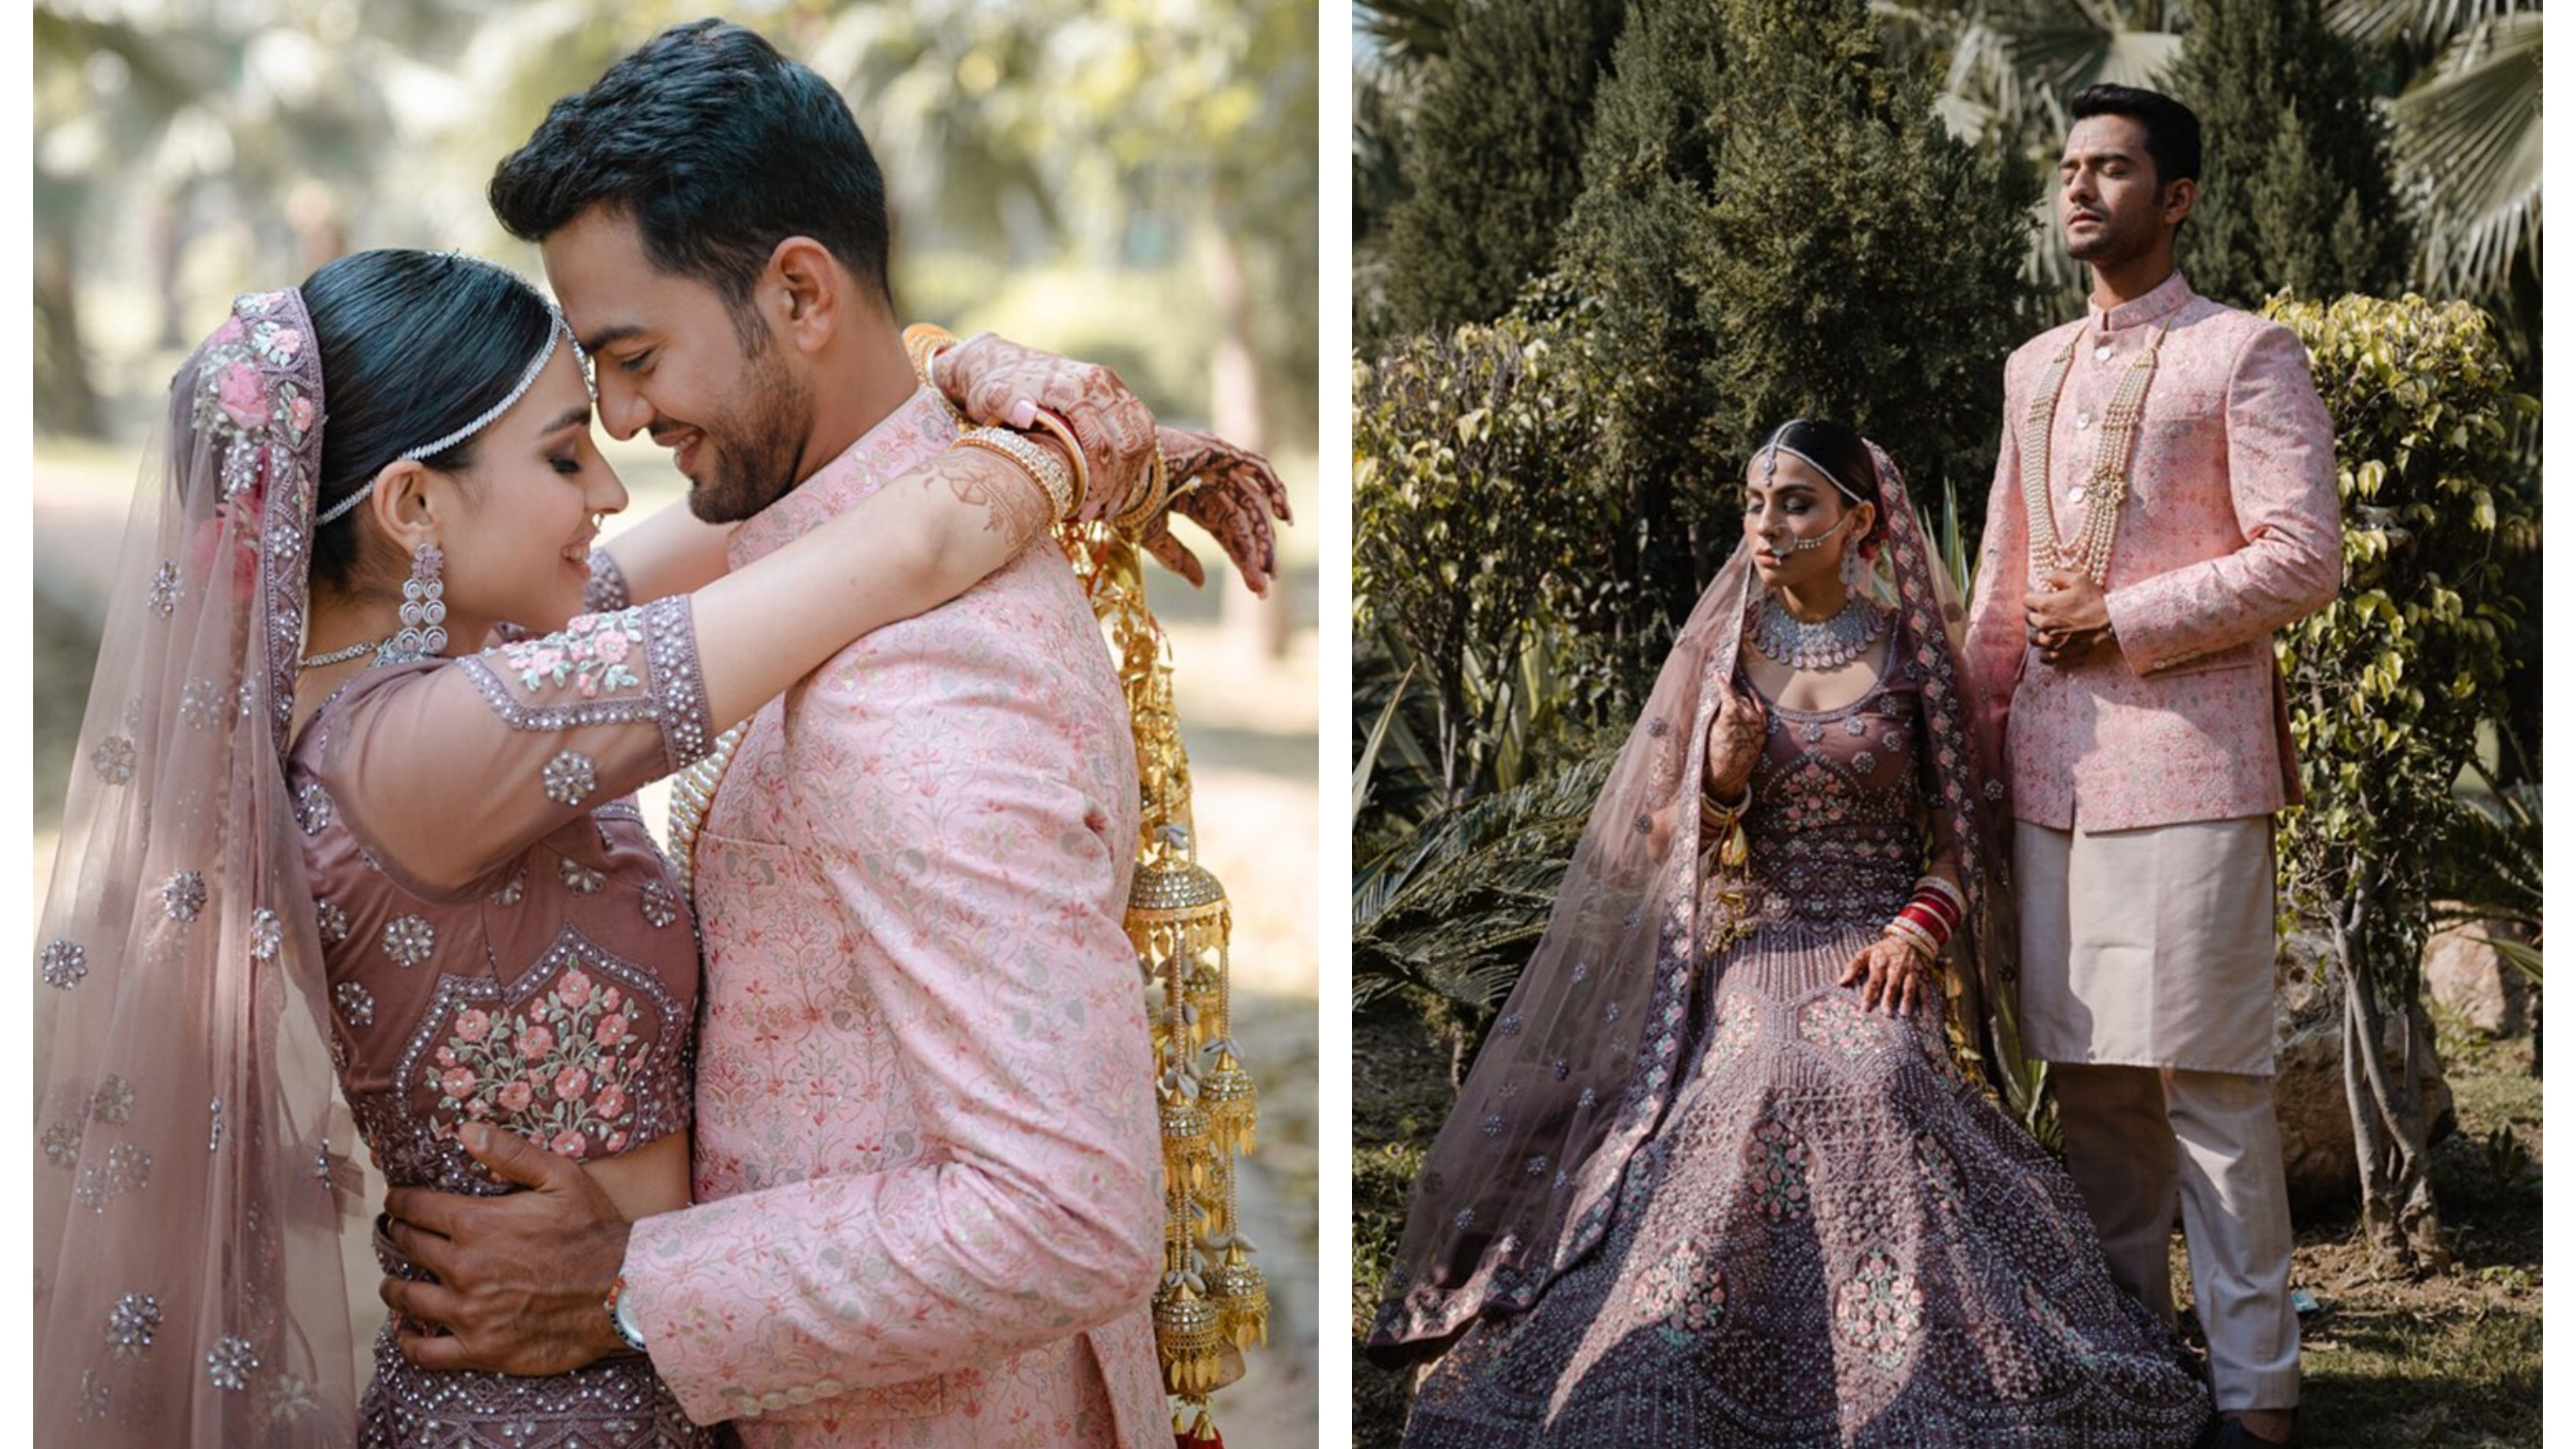 Unmukt Chand ties knot with nutritionist Simran Khosla; shares pictures on social media